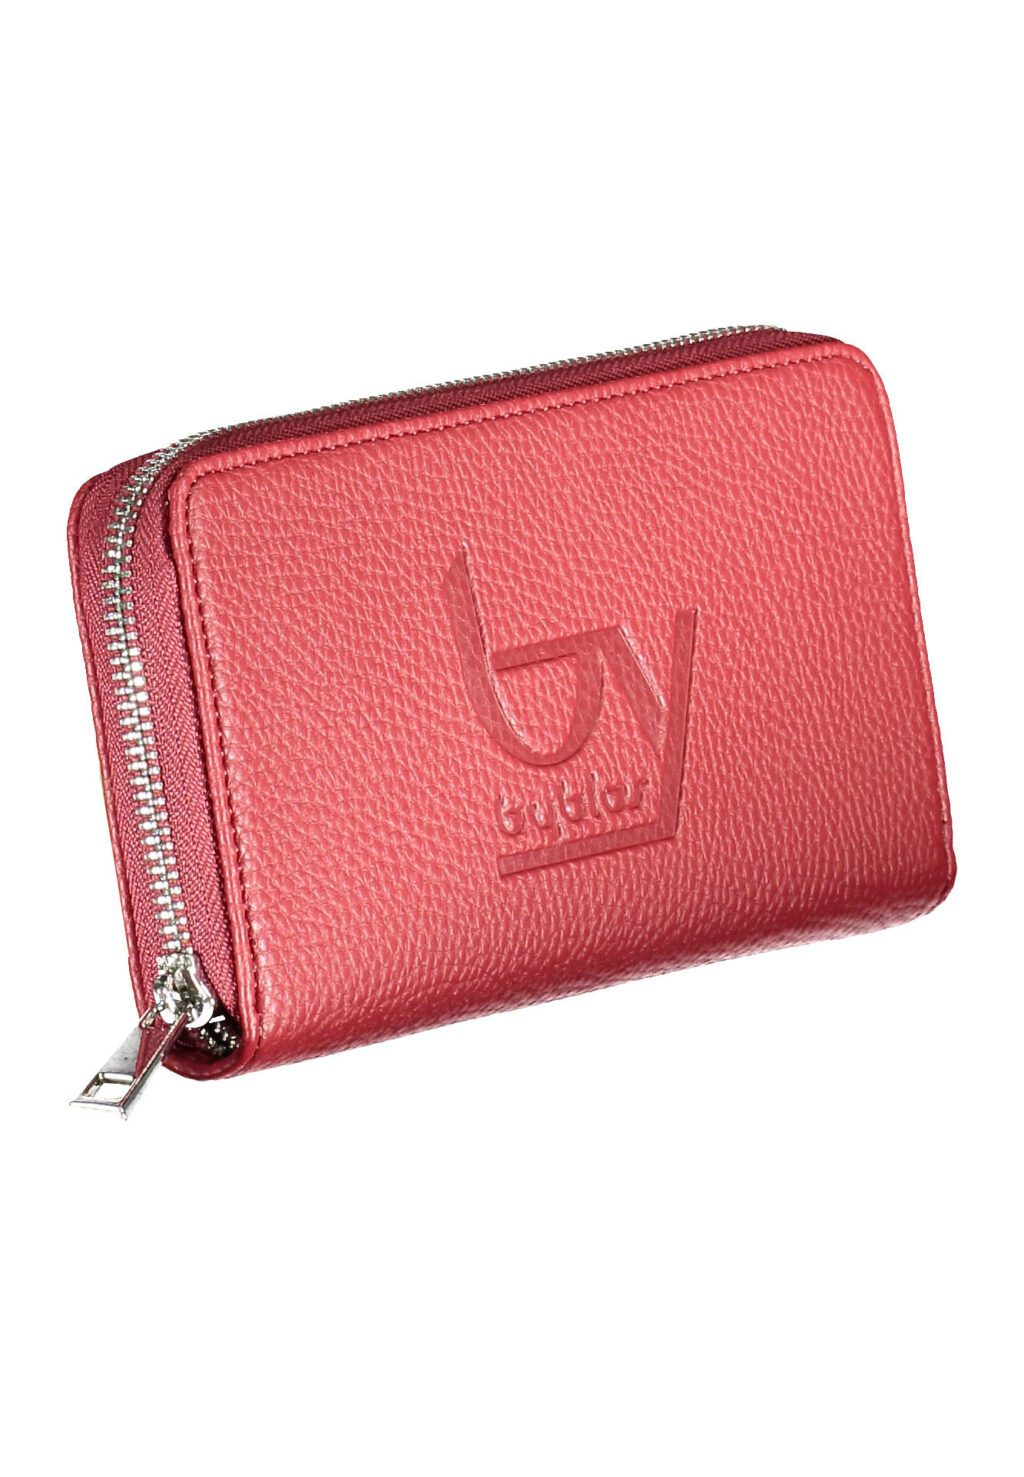 BYBLOS WALLET WOMAN RED 20200015_ROSSO_4189-CHERRY